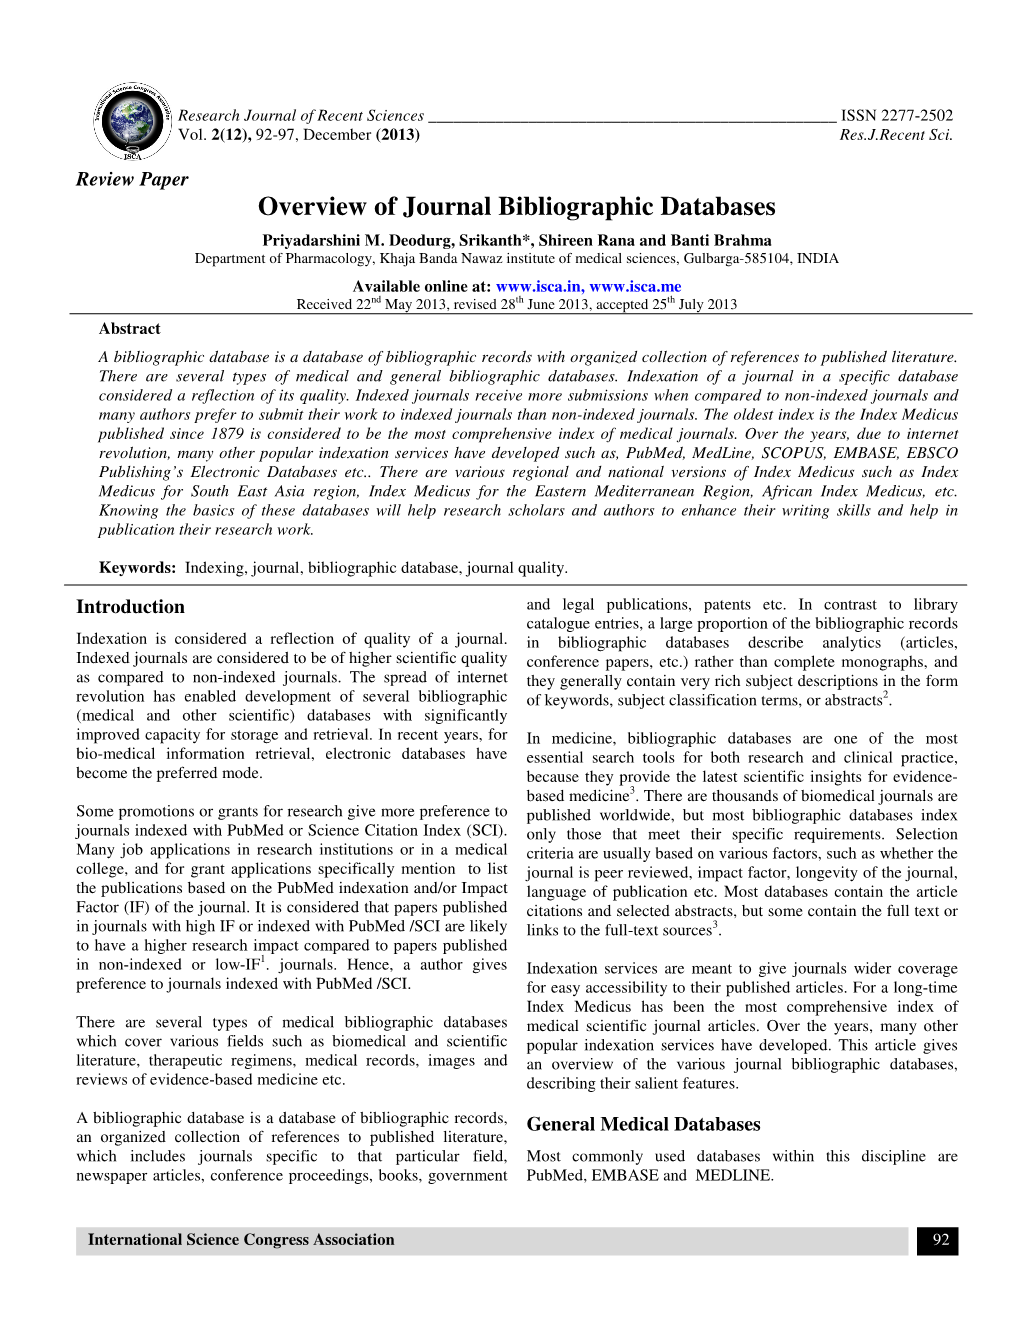 Overview of Journal Bibliographic Databases